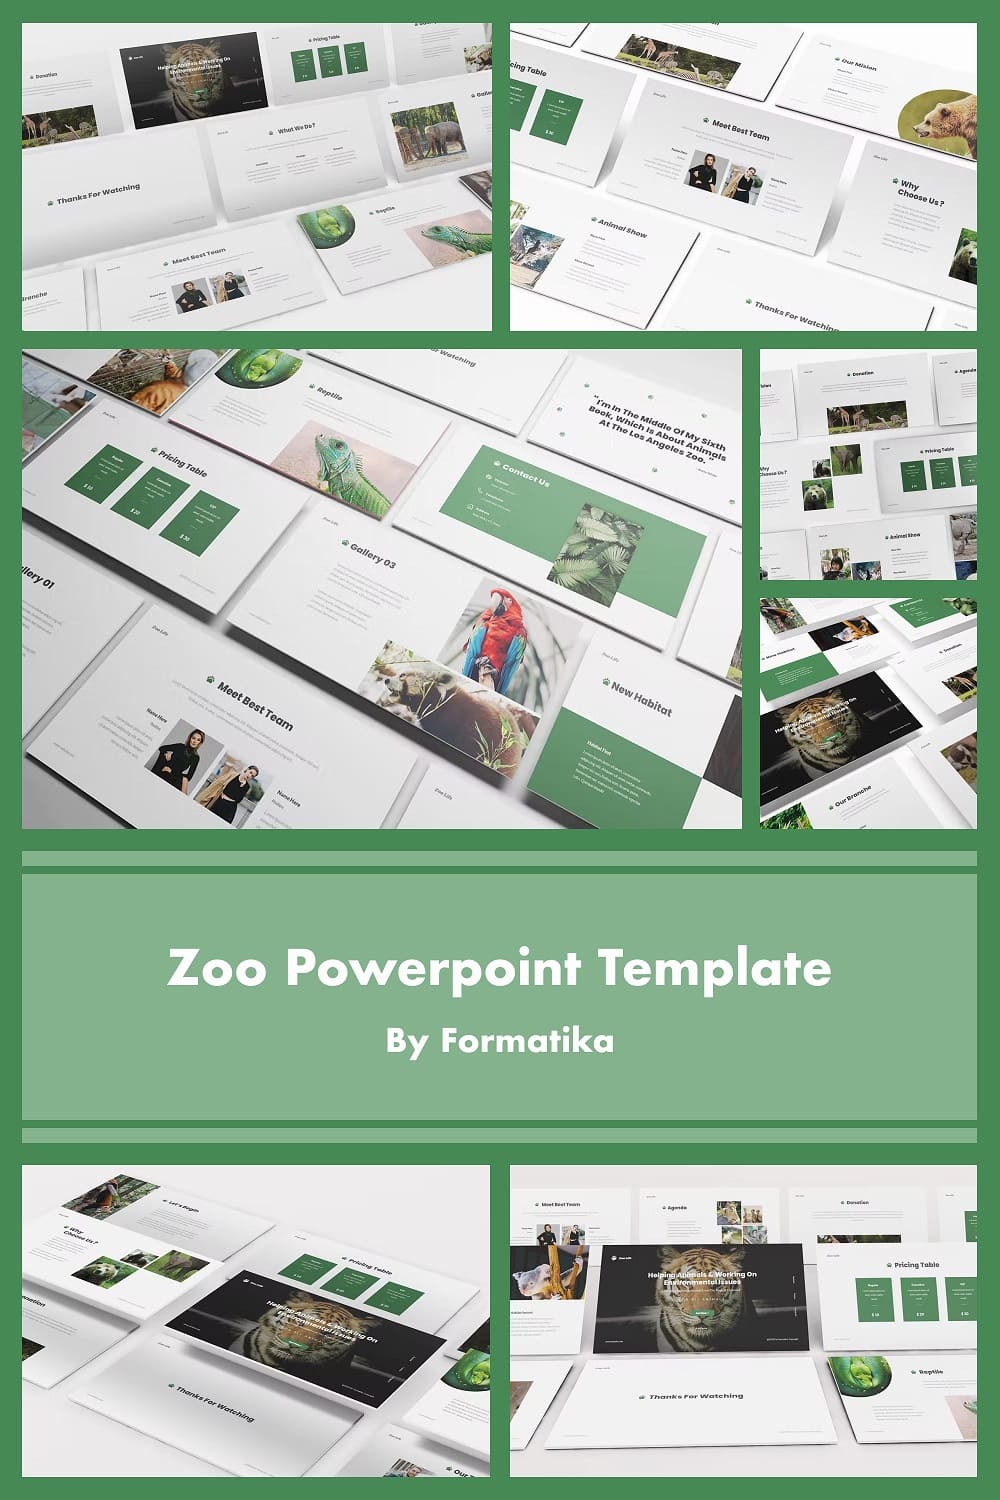 Zoo Powerpoint Template by Formatica.